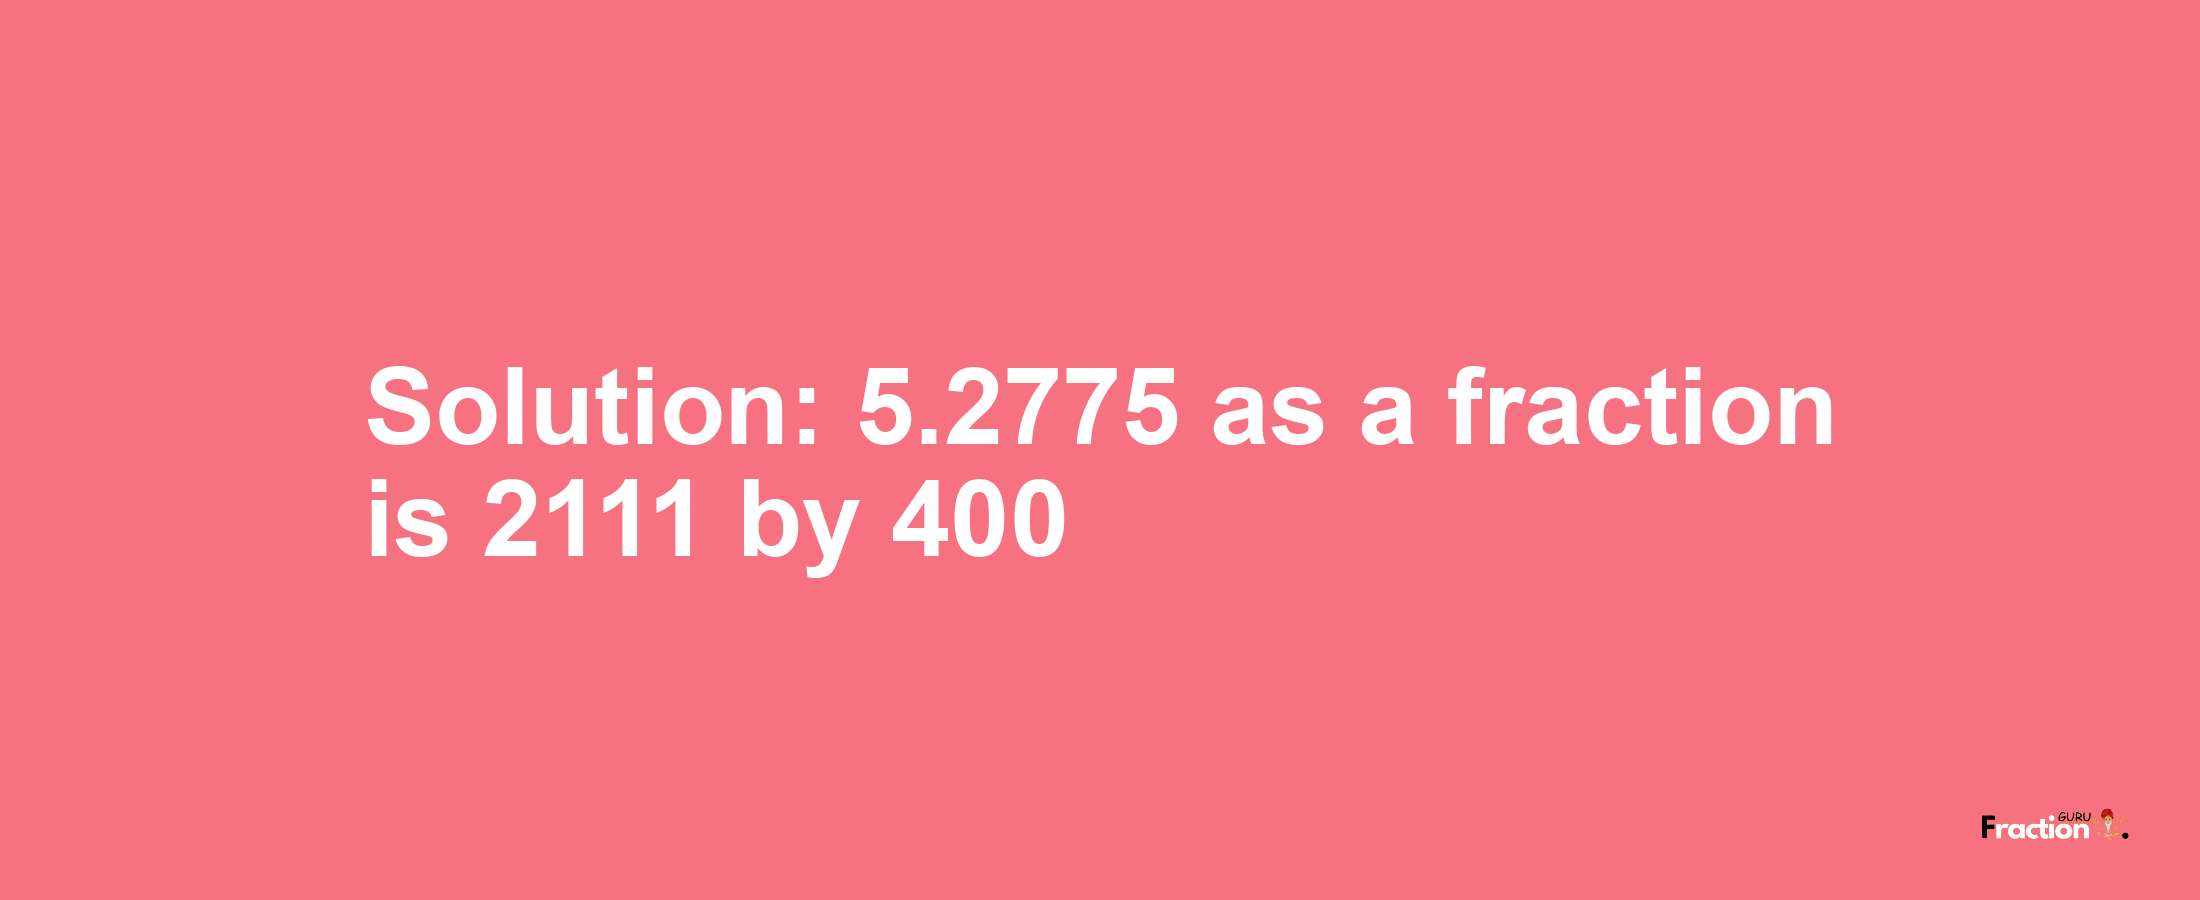 Solution:5.2775 as a fraction is 2111/400